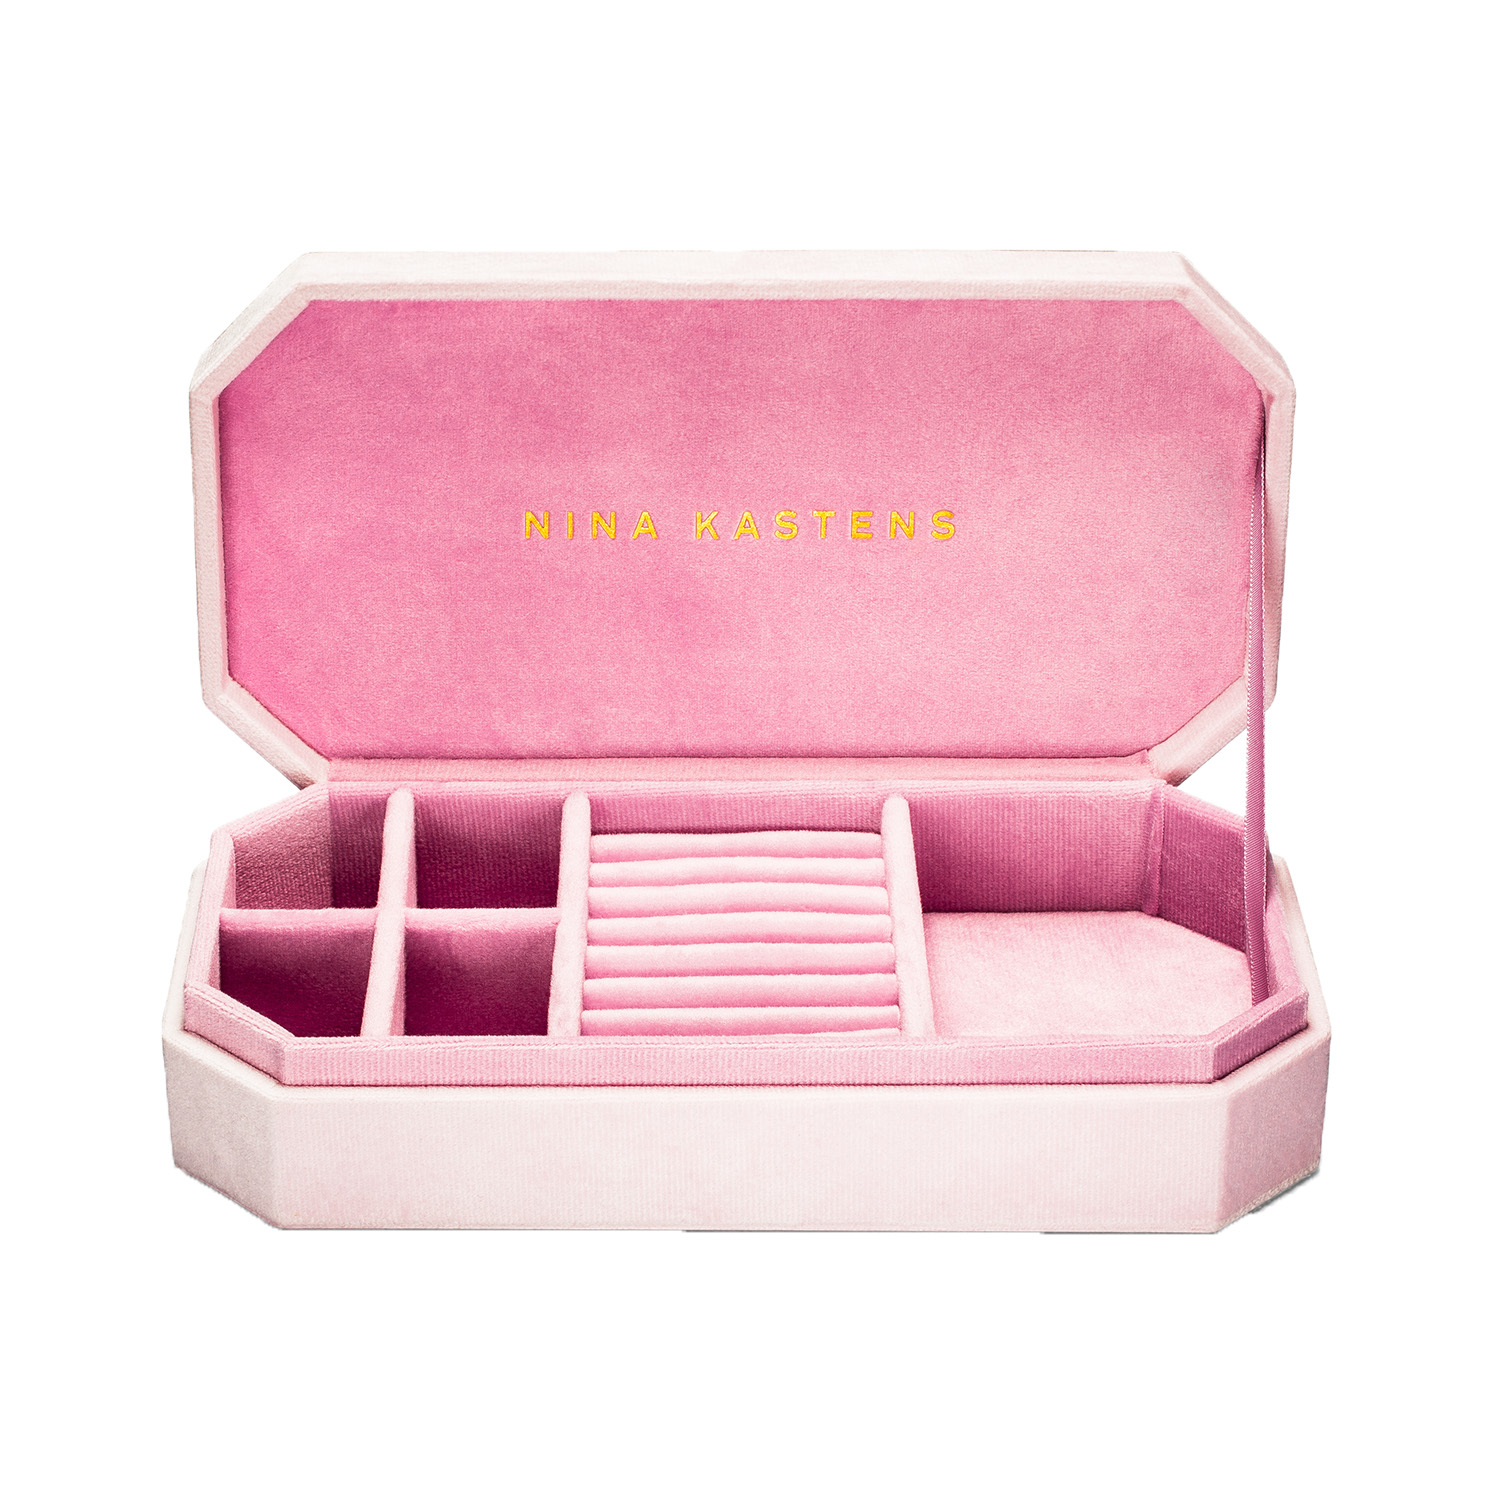 Have a Nice Day Jewelry Box Pink - NINA KASTENS